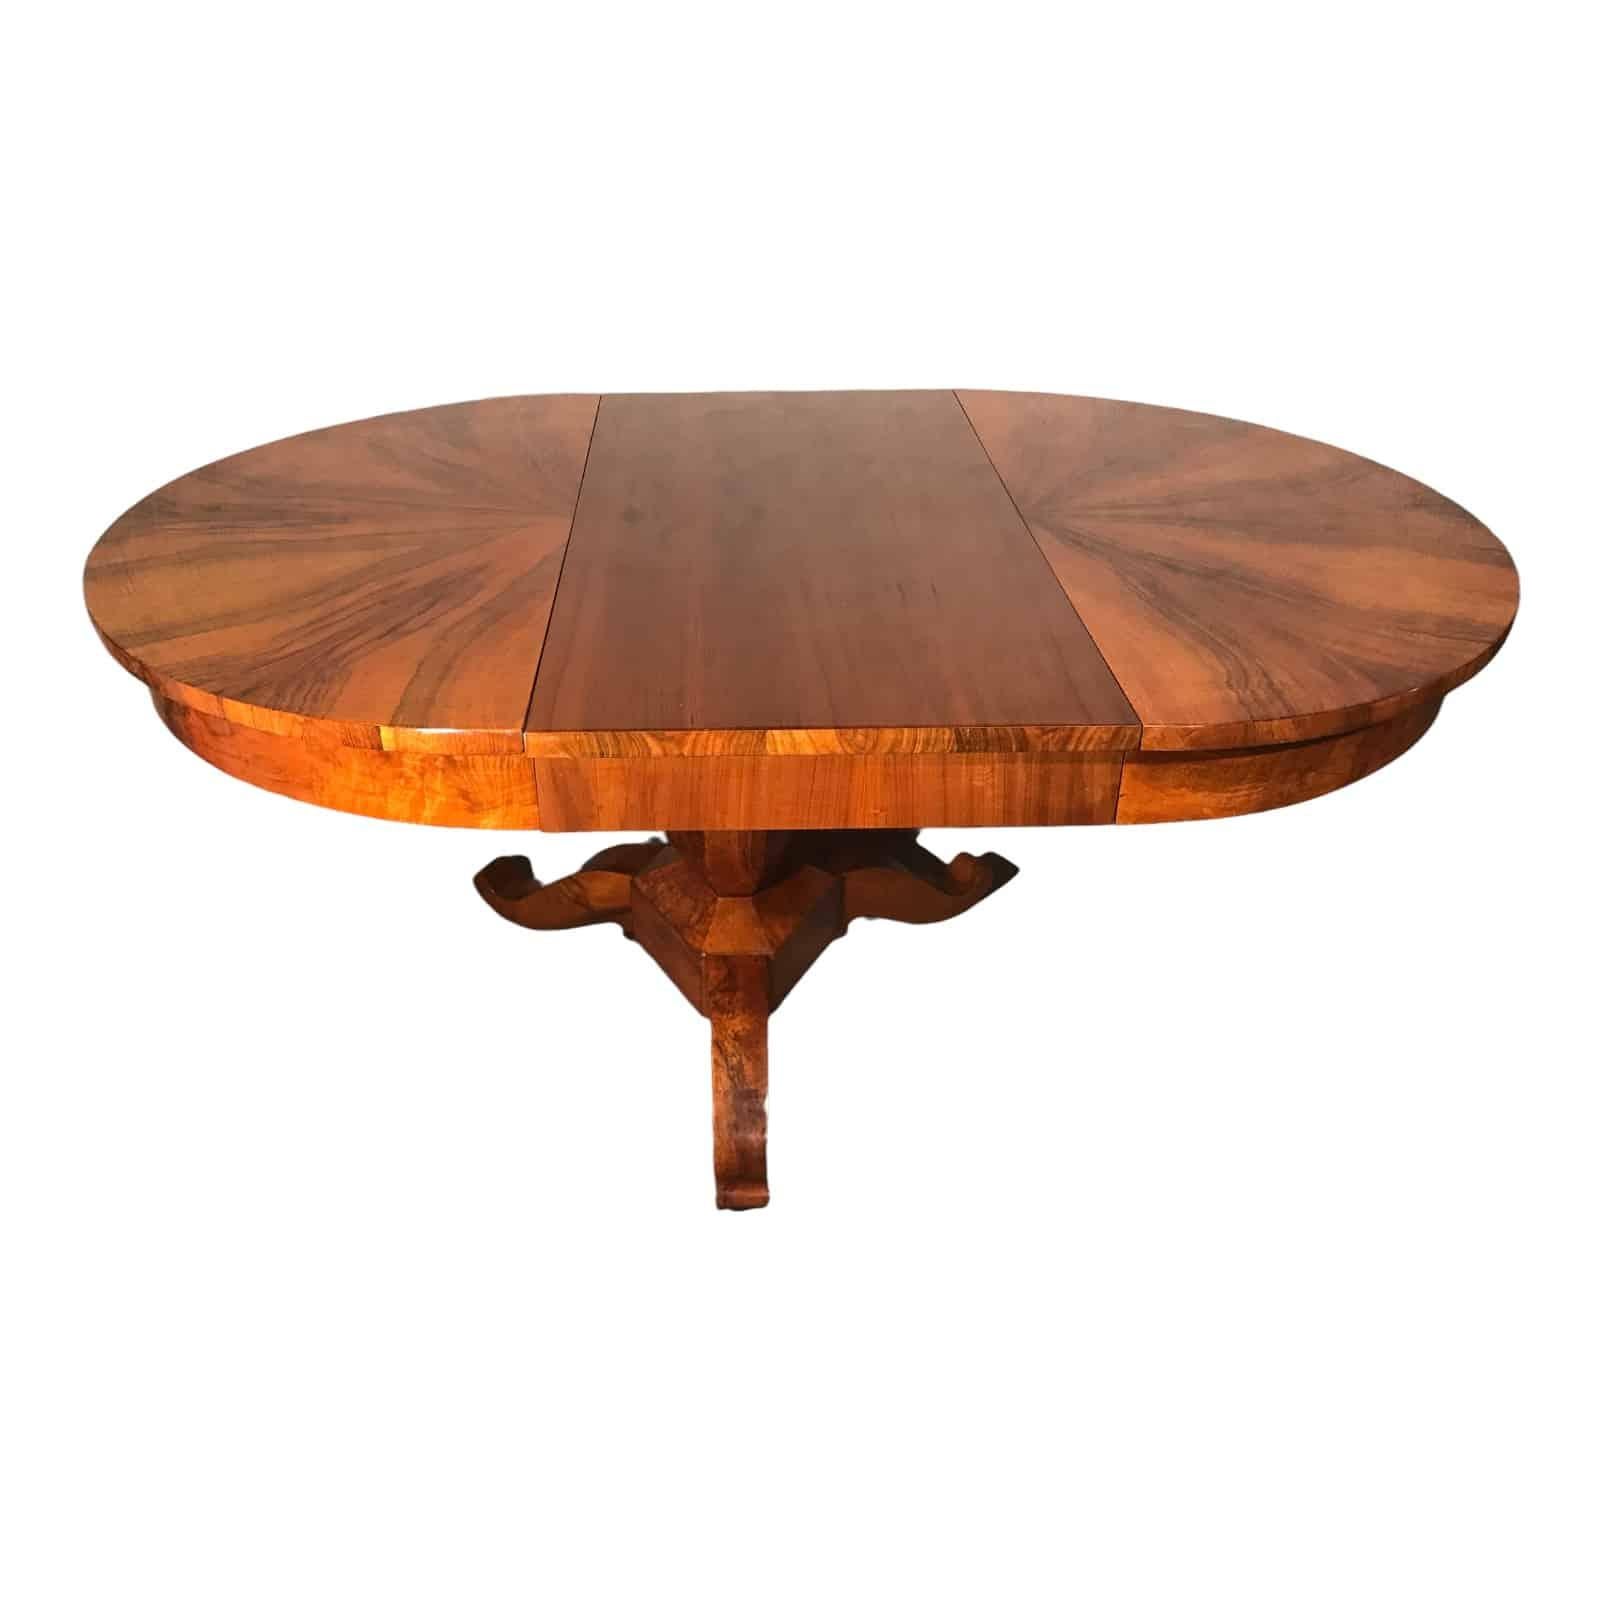 Antique Extendable Biedermeier Table, 1820-30, Walnut
This antique extendable Biedermeier table dates back to around 1820-30 and comes from southern Germany. The table has a very pretty walnut piecrust veneer on the top. The base has a central